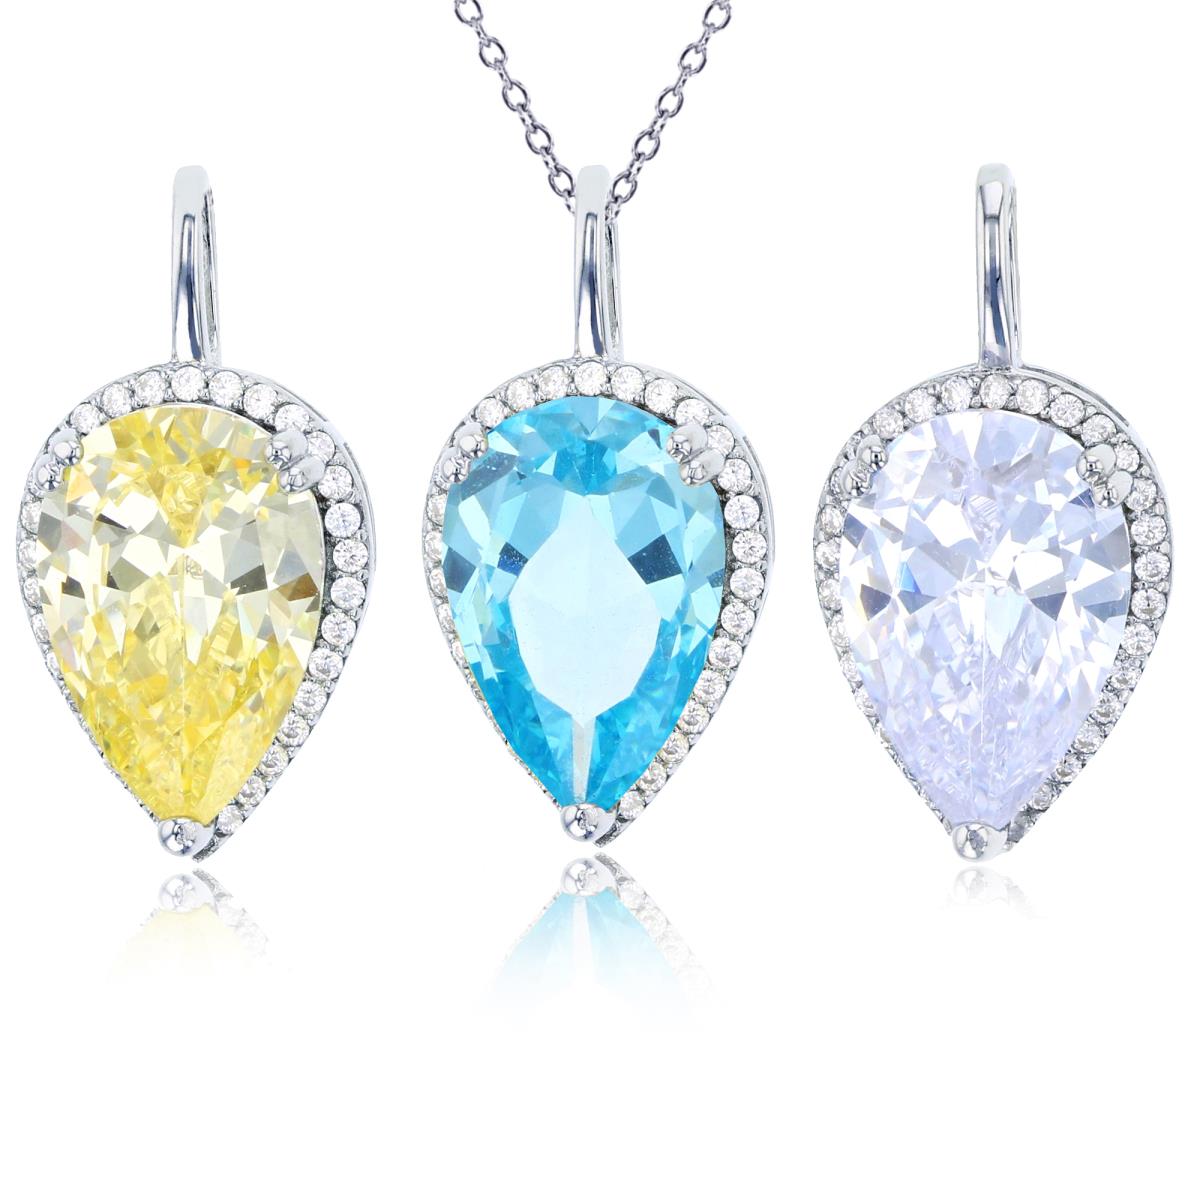 Sterling Silver Rhodium 15x10mm White, Yellow & Blue Pear & Rd CZ Halo Set Of 3 Pendants & 18" Chain